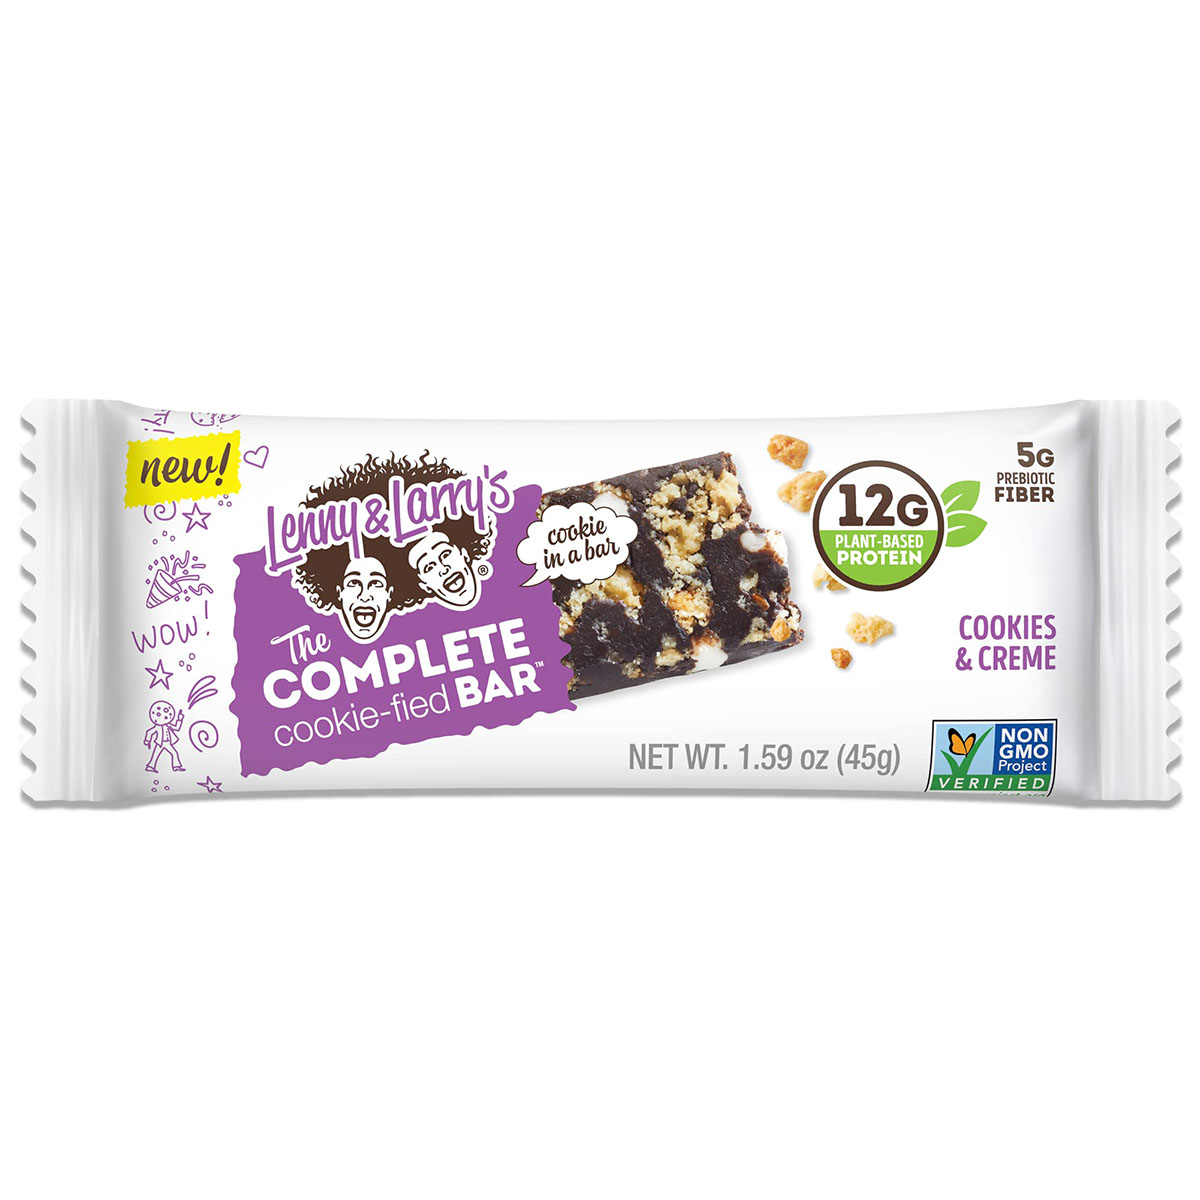 Lenny & Larry’s The Complete Cookie-fied Bar Cookies and Cream 1 Bar